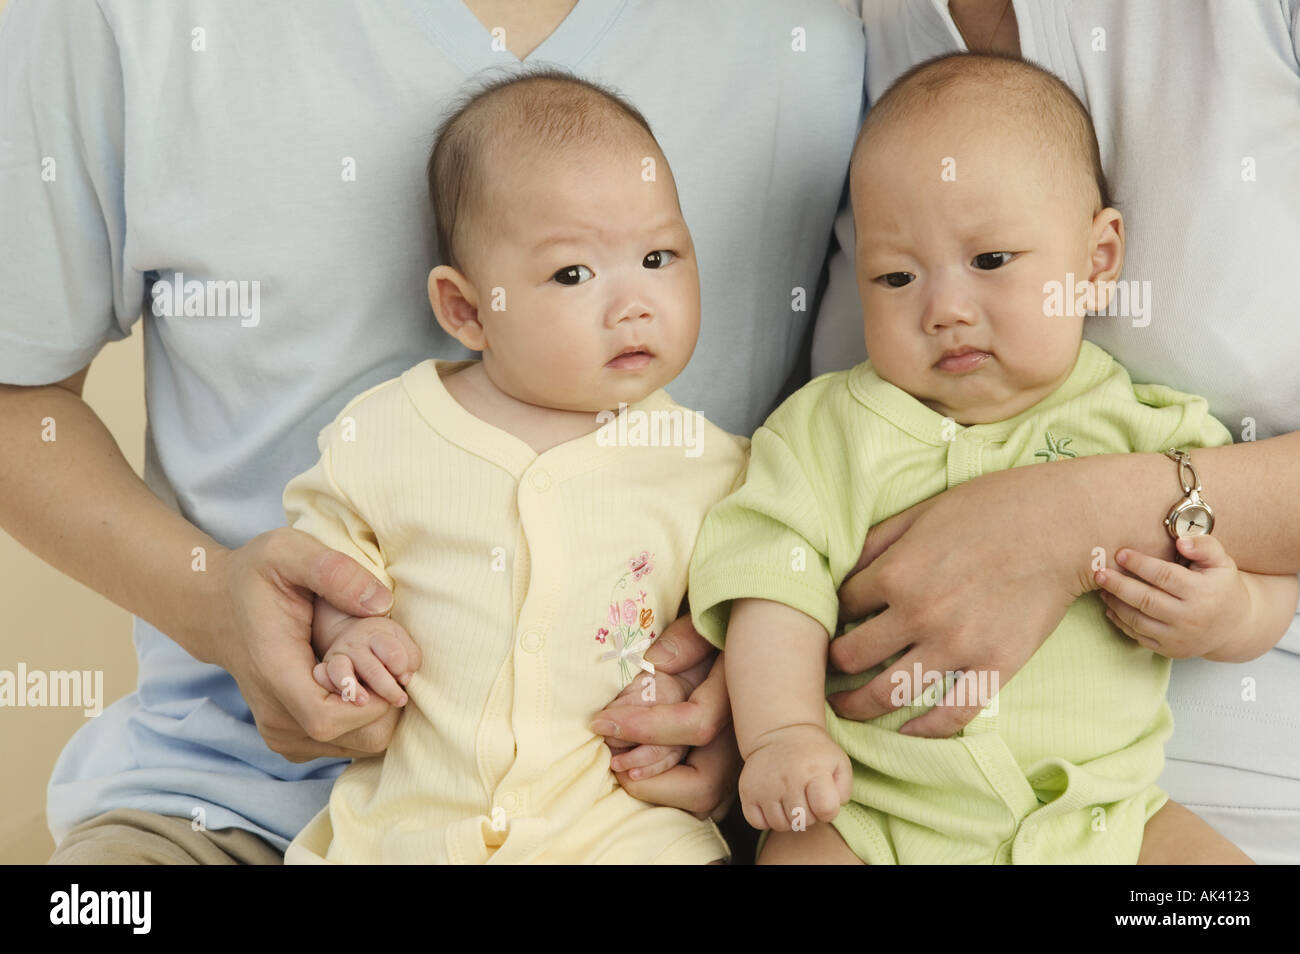 Twins sitting side by side on their parents laps Stock Photo